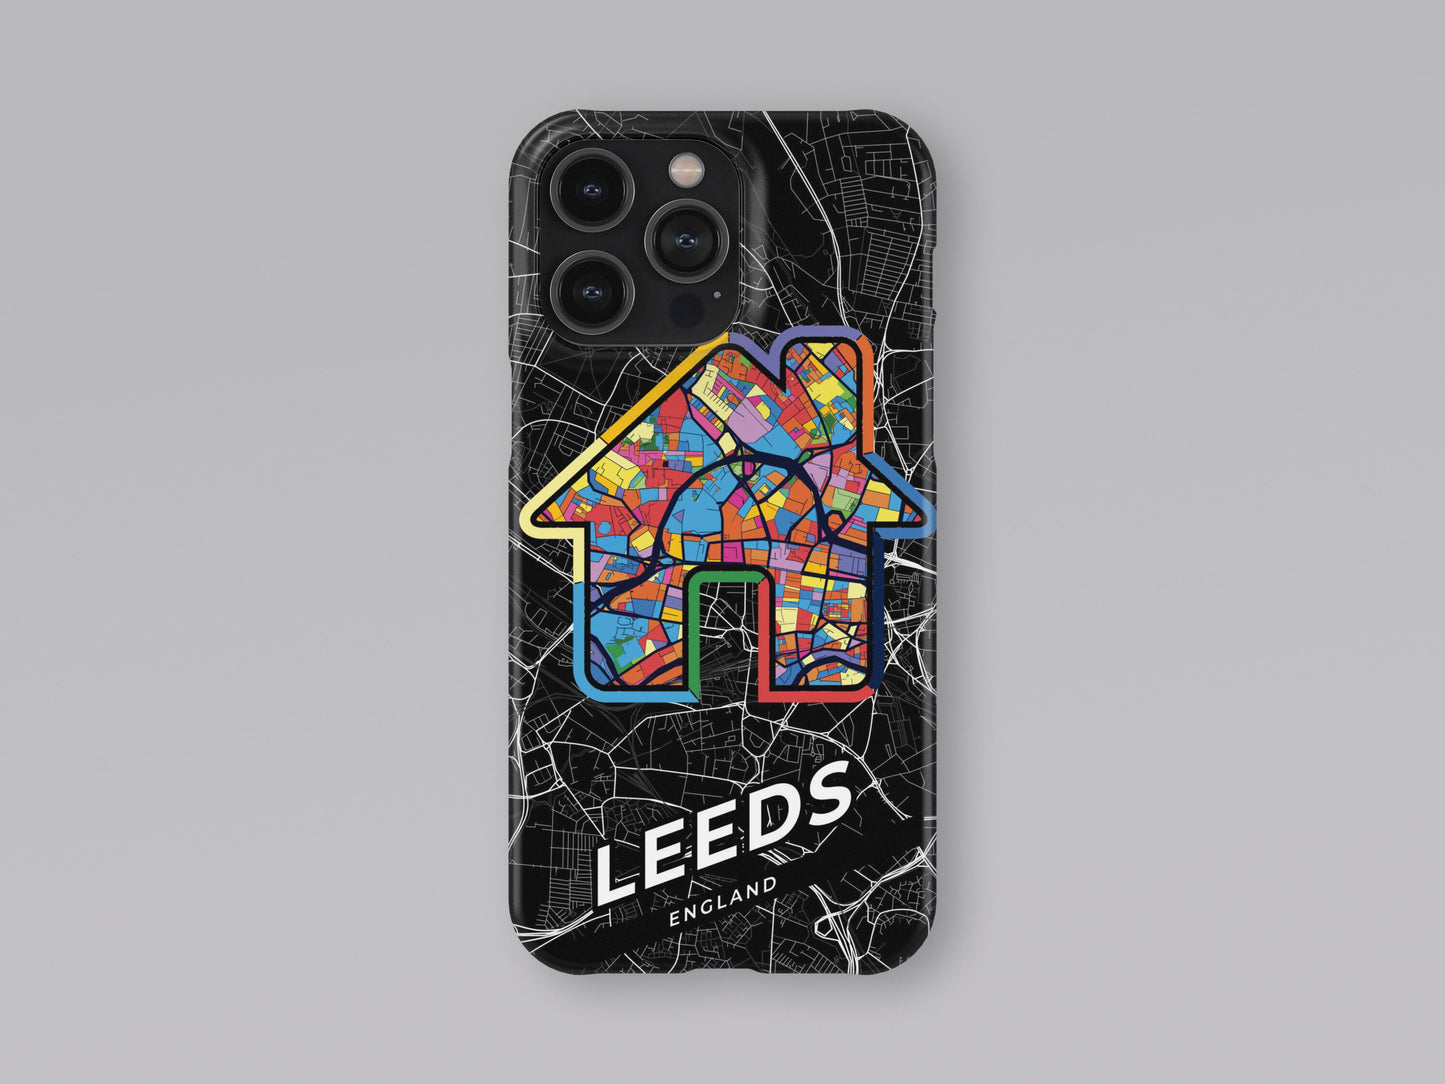 Leeds England slim phone case with colorful icon. Birthday, wedding or housewarming gift. Couple match cases. 3